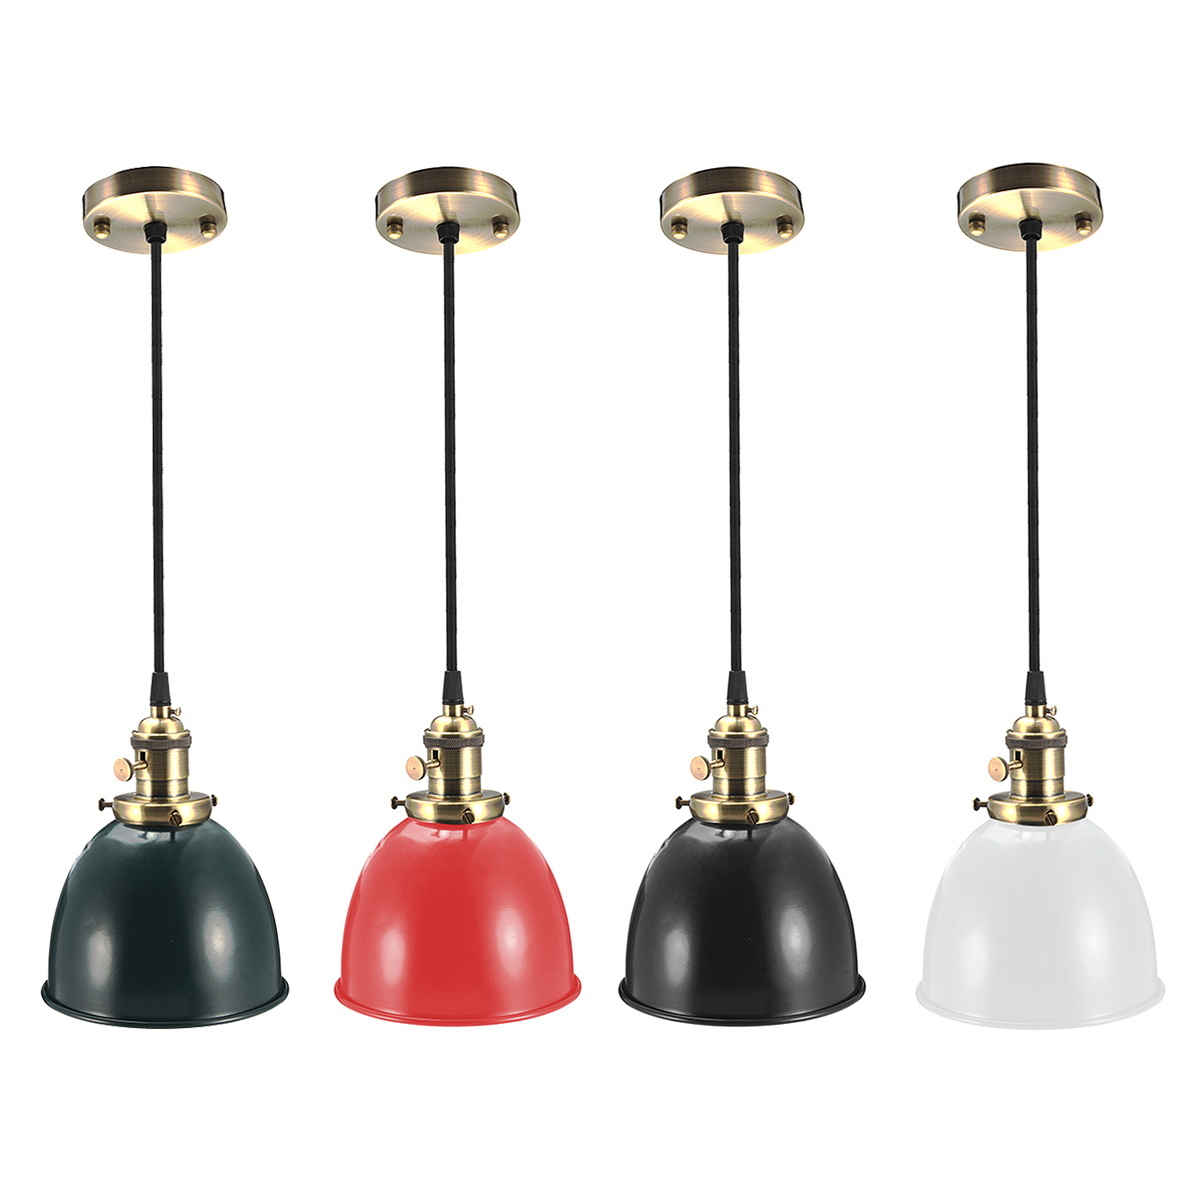 Find Elfeland Cafe Style Retro Ceiling Light Pendant Metal Shade-Modern Rustic Industrial Vintage Look-E27 Socket Height-adjustable Lampshade-for Loft Bar Cafe Light Ceiling Lamp Shade for Sale on Gipsybee.com with cryptocurrencies